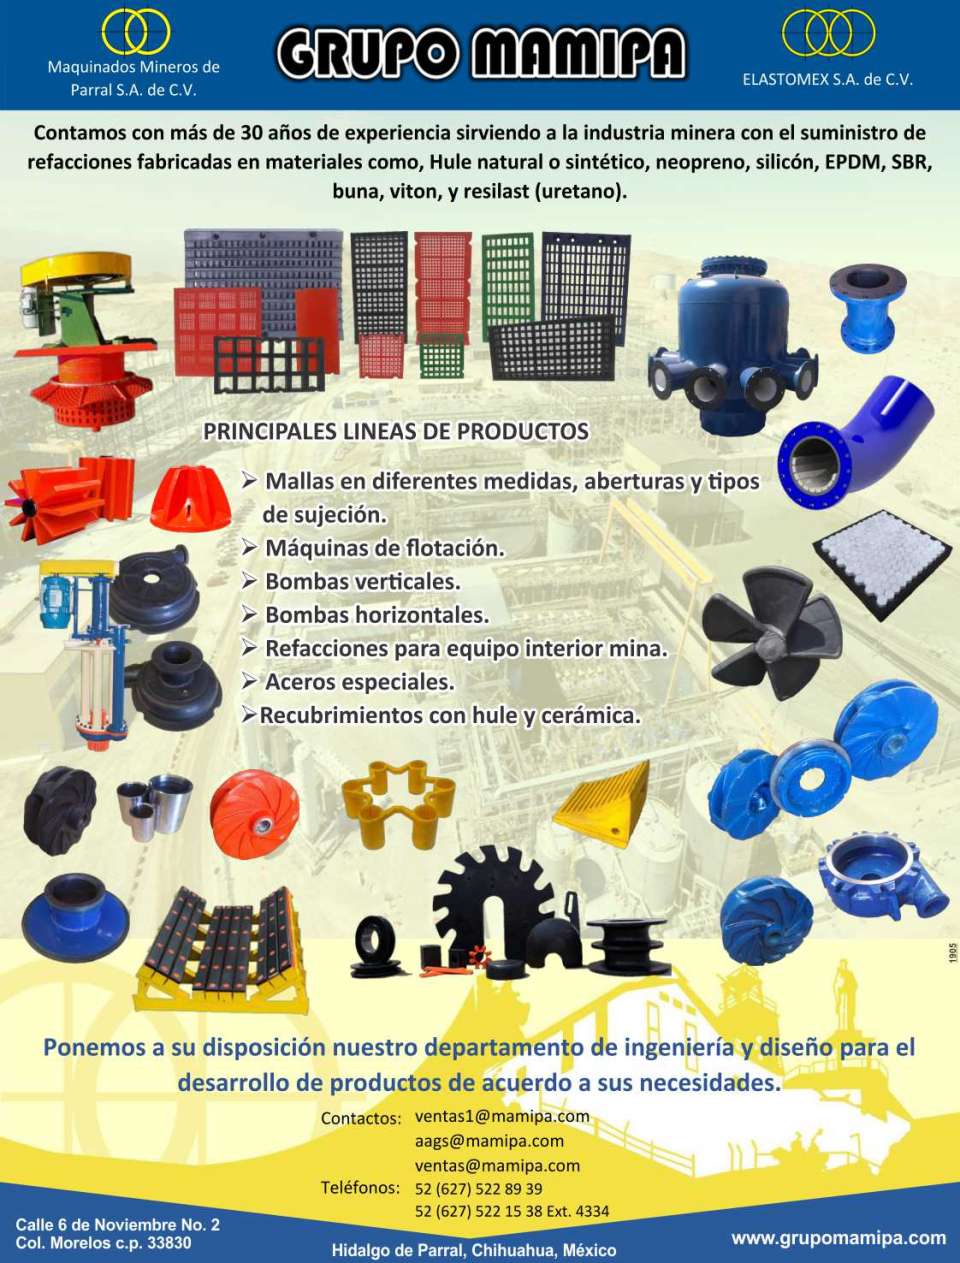 Supply of spare parts made of materials such as natural or synthetic rubber, neoprene, silicon, EPDM, SBR, buna, viton, resilast